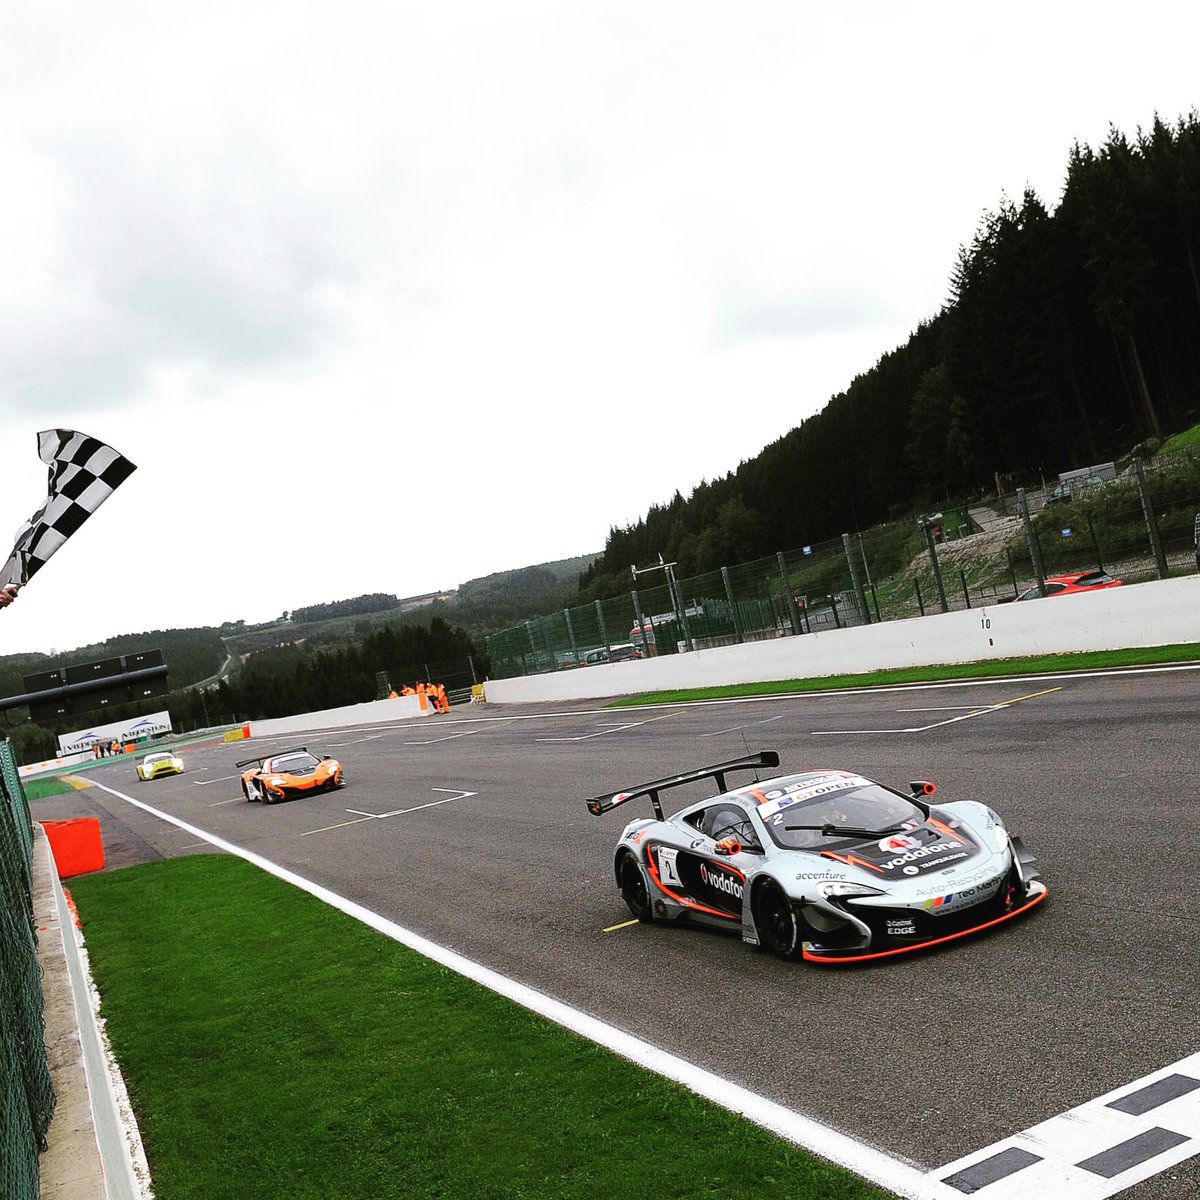 #didyouknow that we achieved the second win of 2015 @GT_Open season at Spa with M.Ramos & @alvaroparente behind the wheel of the #mclaren650sgt3 ?👊🏻👊🏻 #TeoMartinMotorsport #TBT #TMM #InternationalGTOpen #GTOpen #mclarenauto #throwback #throwbackthursday 📸 x @FotoSpeedy